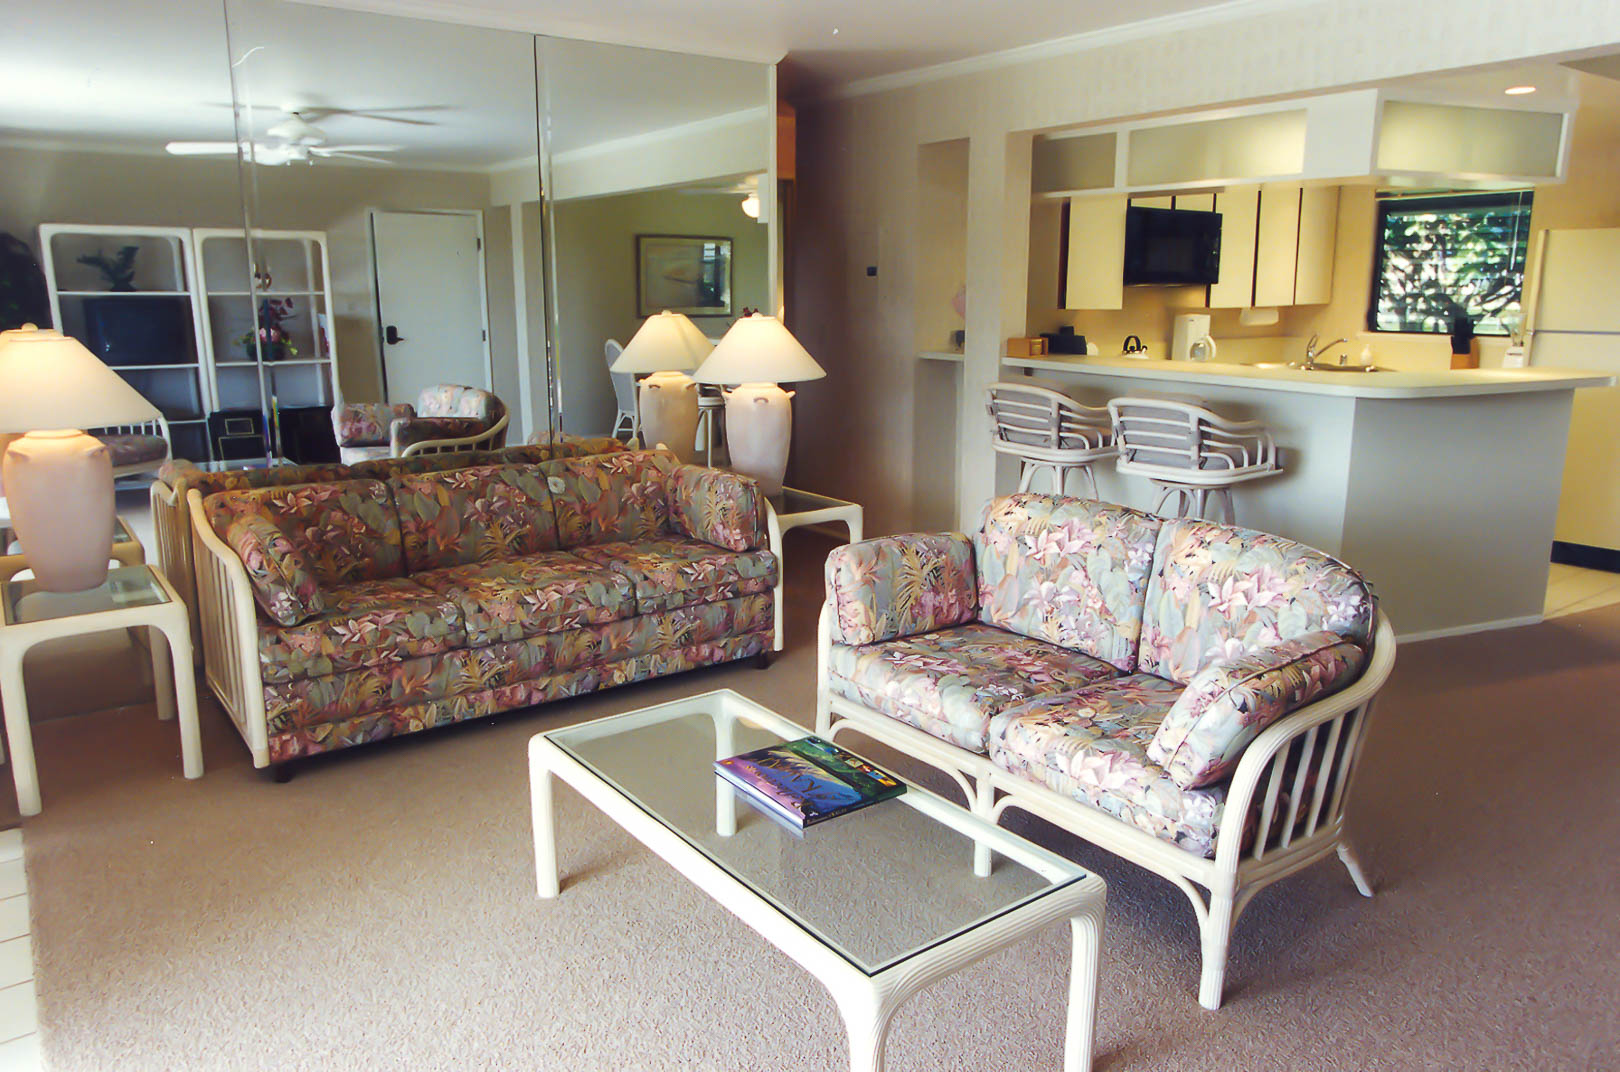 A colorful living room area at VRI's Alii Kai Resort in Hawaii